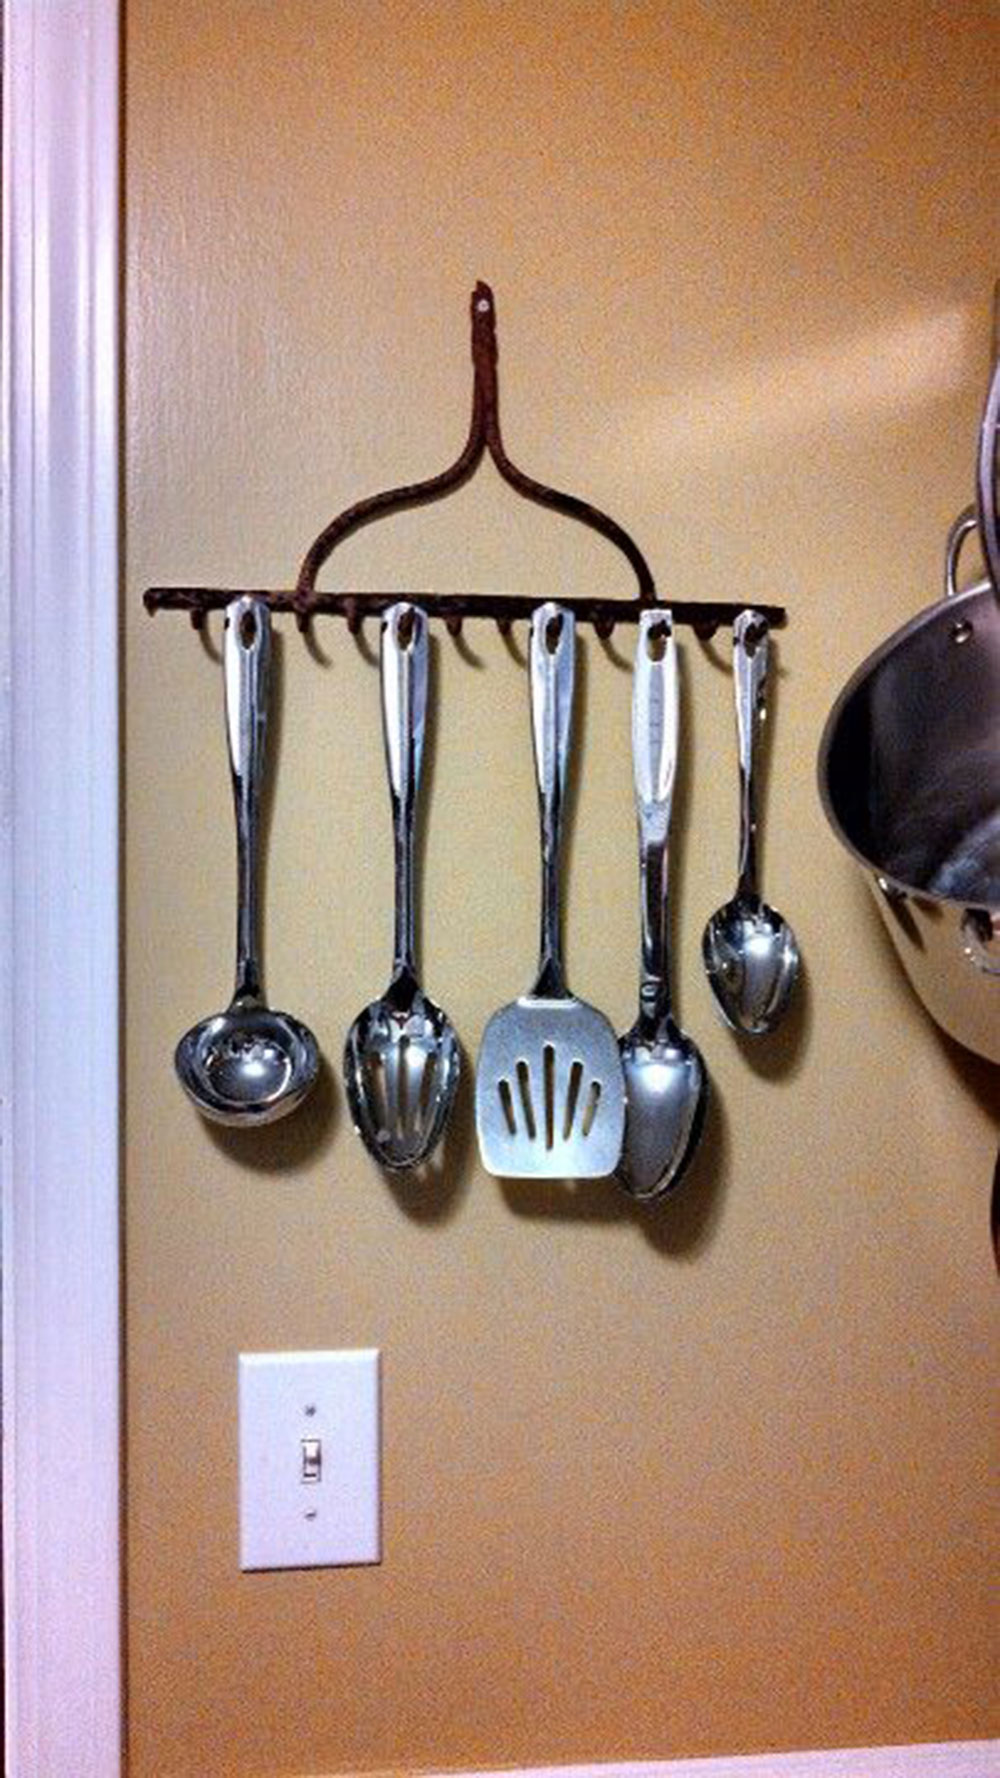 An-Old-Rake How to Organize Kitchen Utensils to Find Them Better